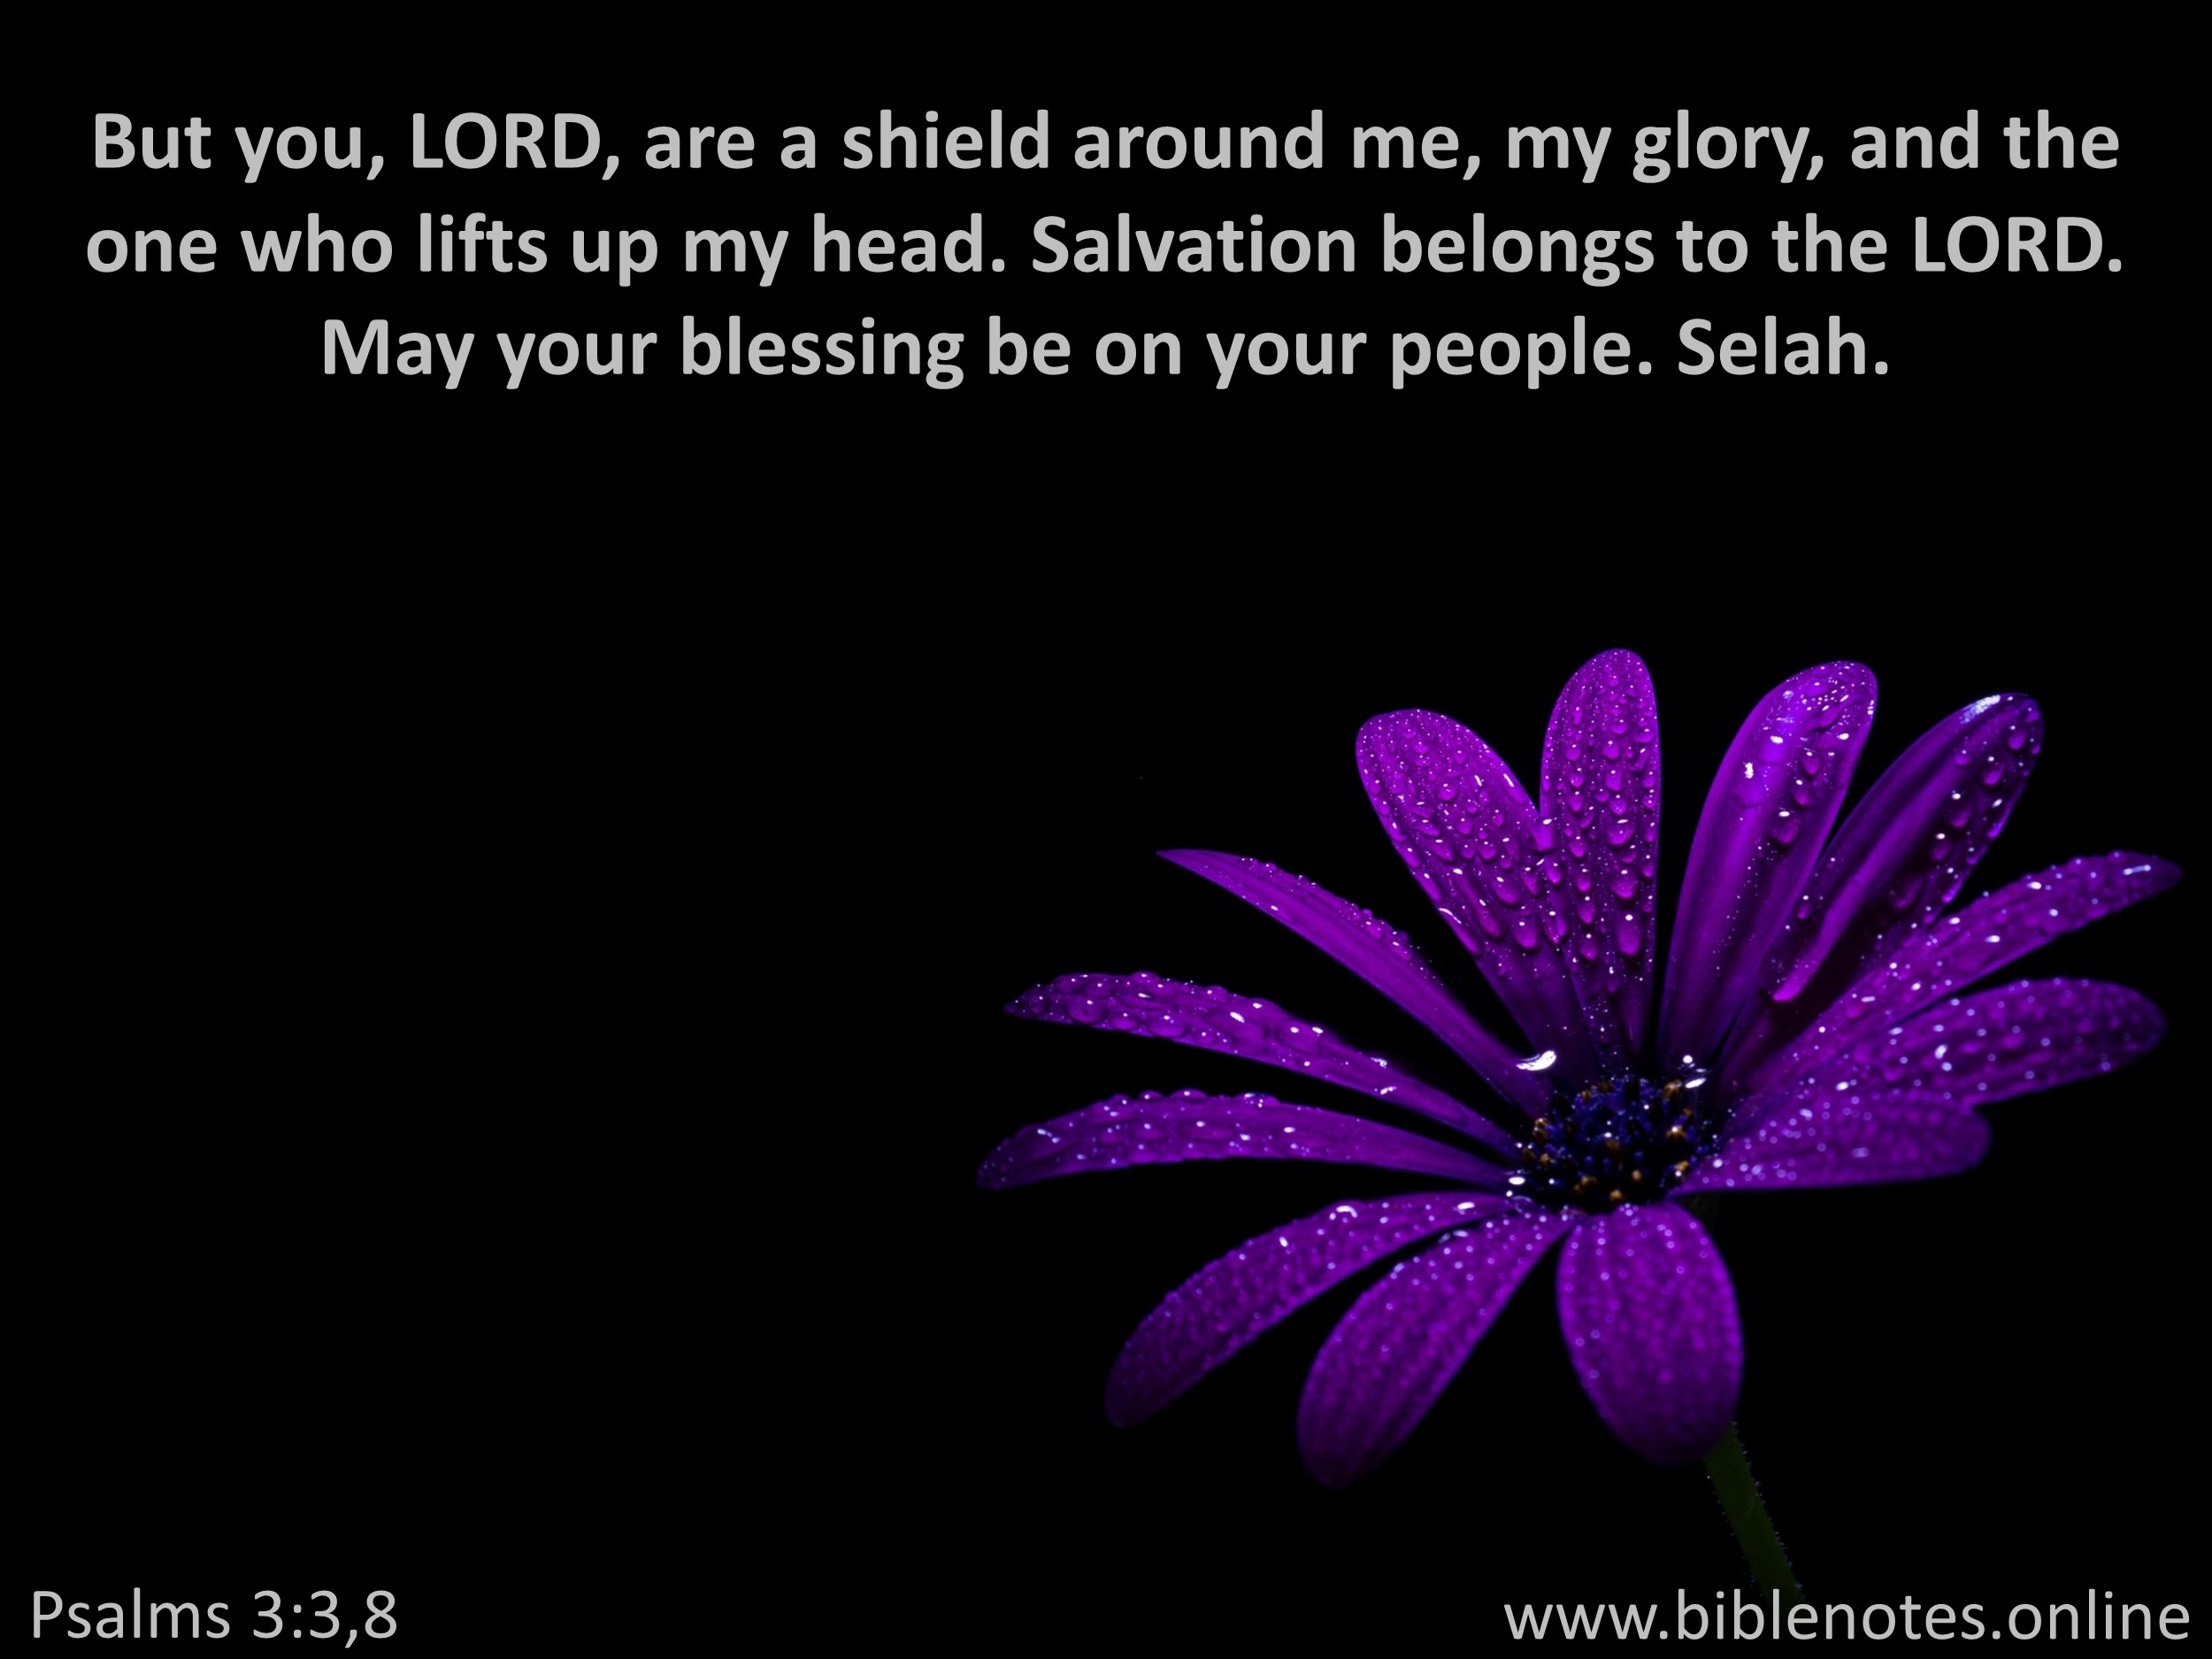 Bible Verse from Psalms Chapter 3